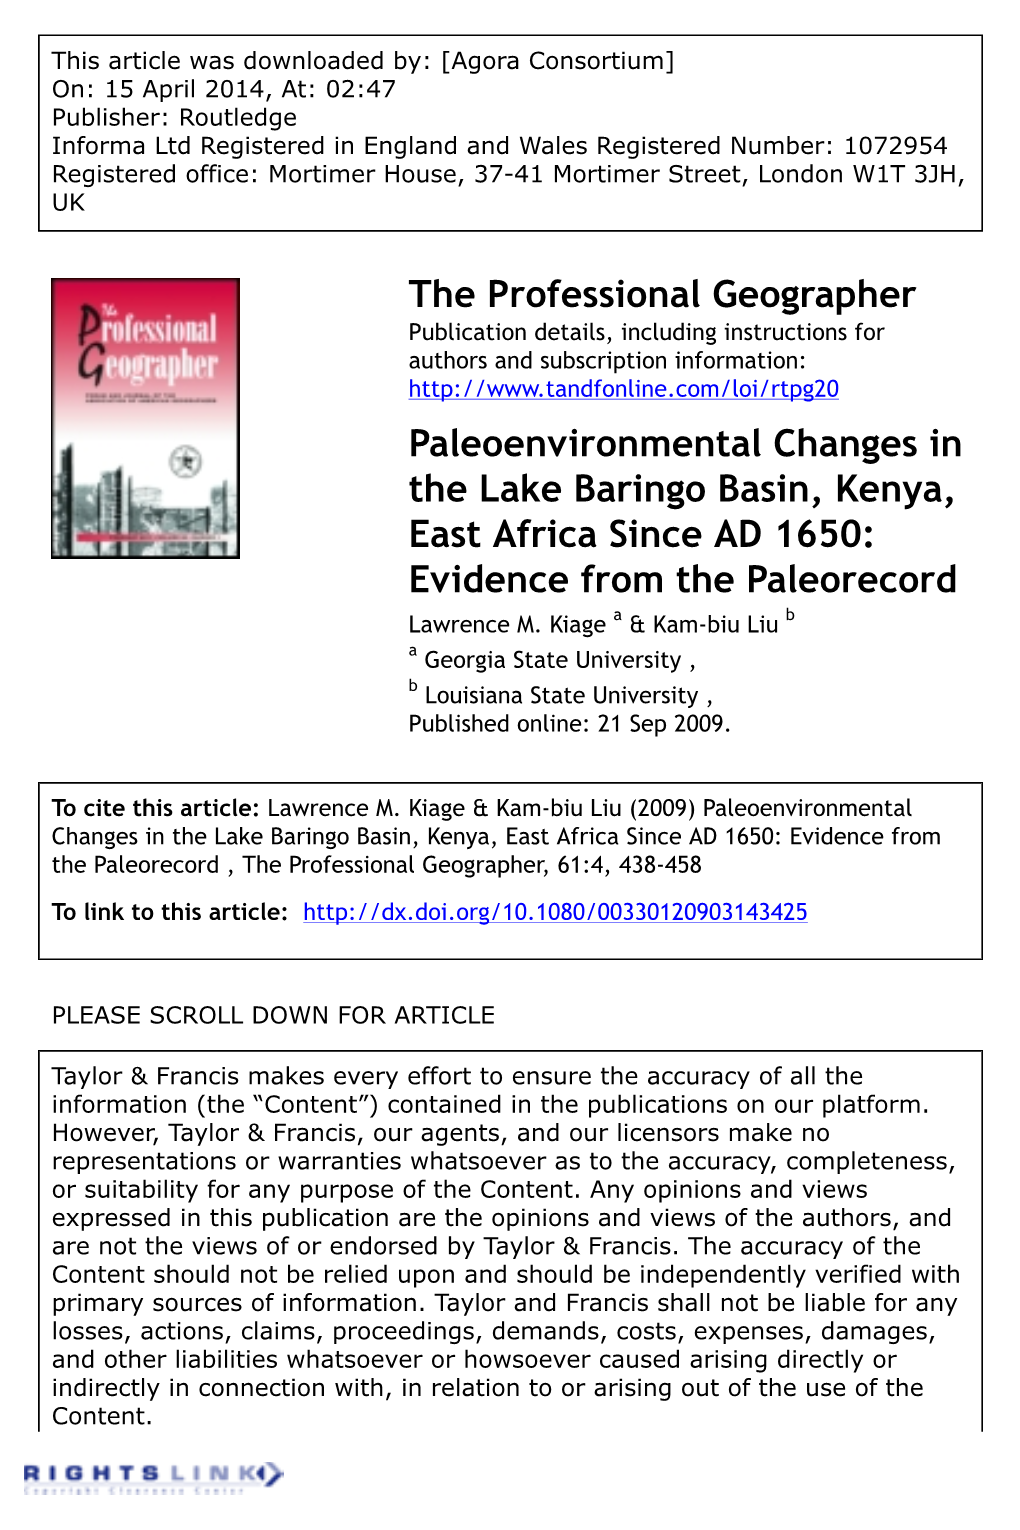 The Professional Geographer Paleoenvironmental Changes In